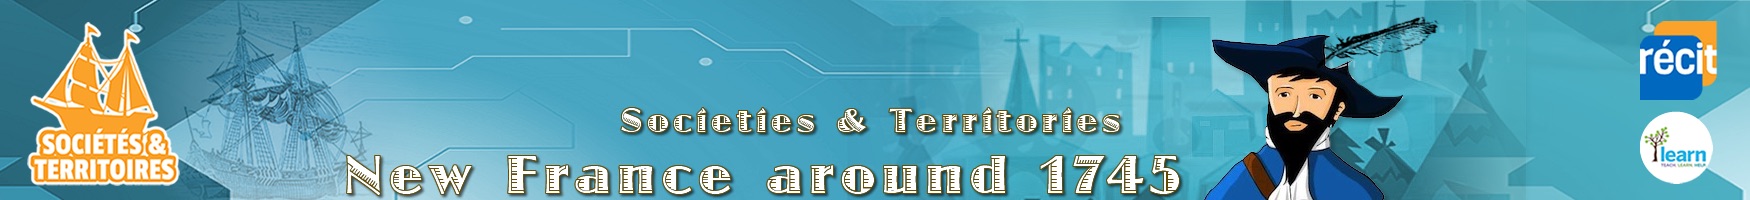 Societies and Territories (LEARN-RÉCIT)